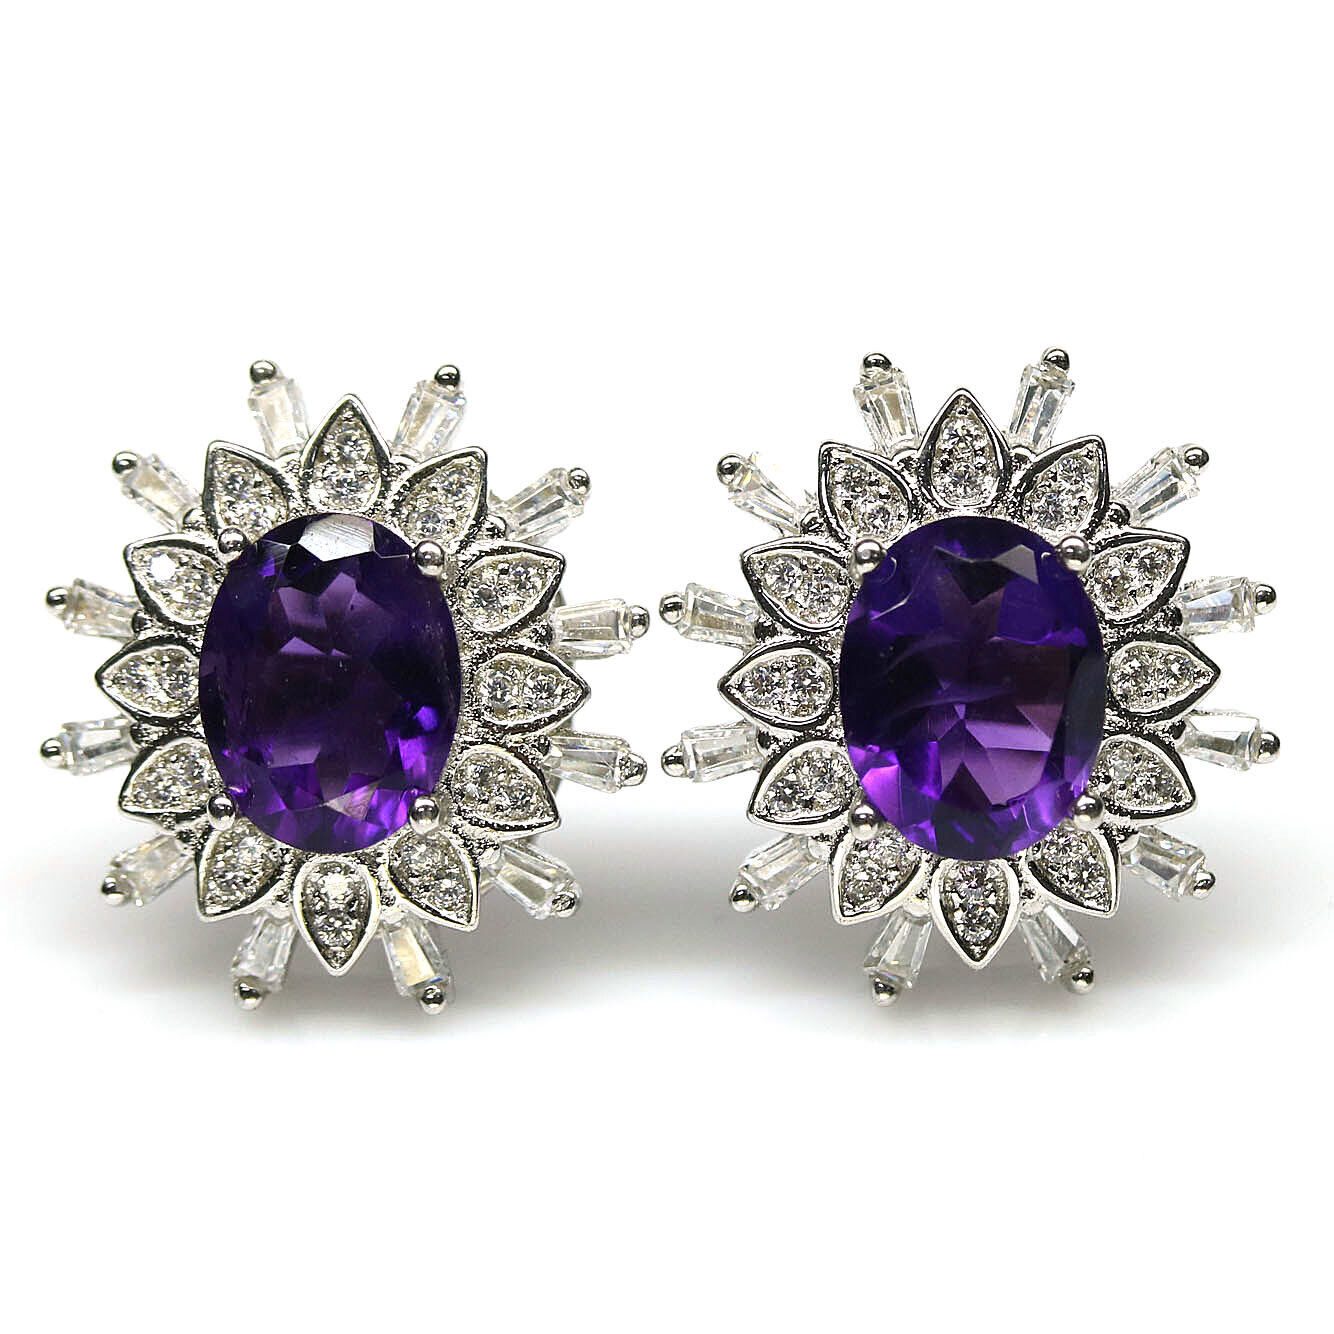 A pair of 925 silver cluster earrings set with oval cut amethysts and white stones, L. 1.7cm.